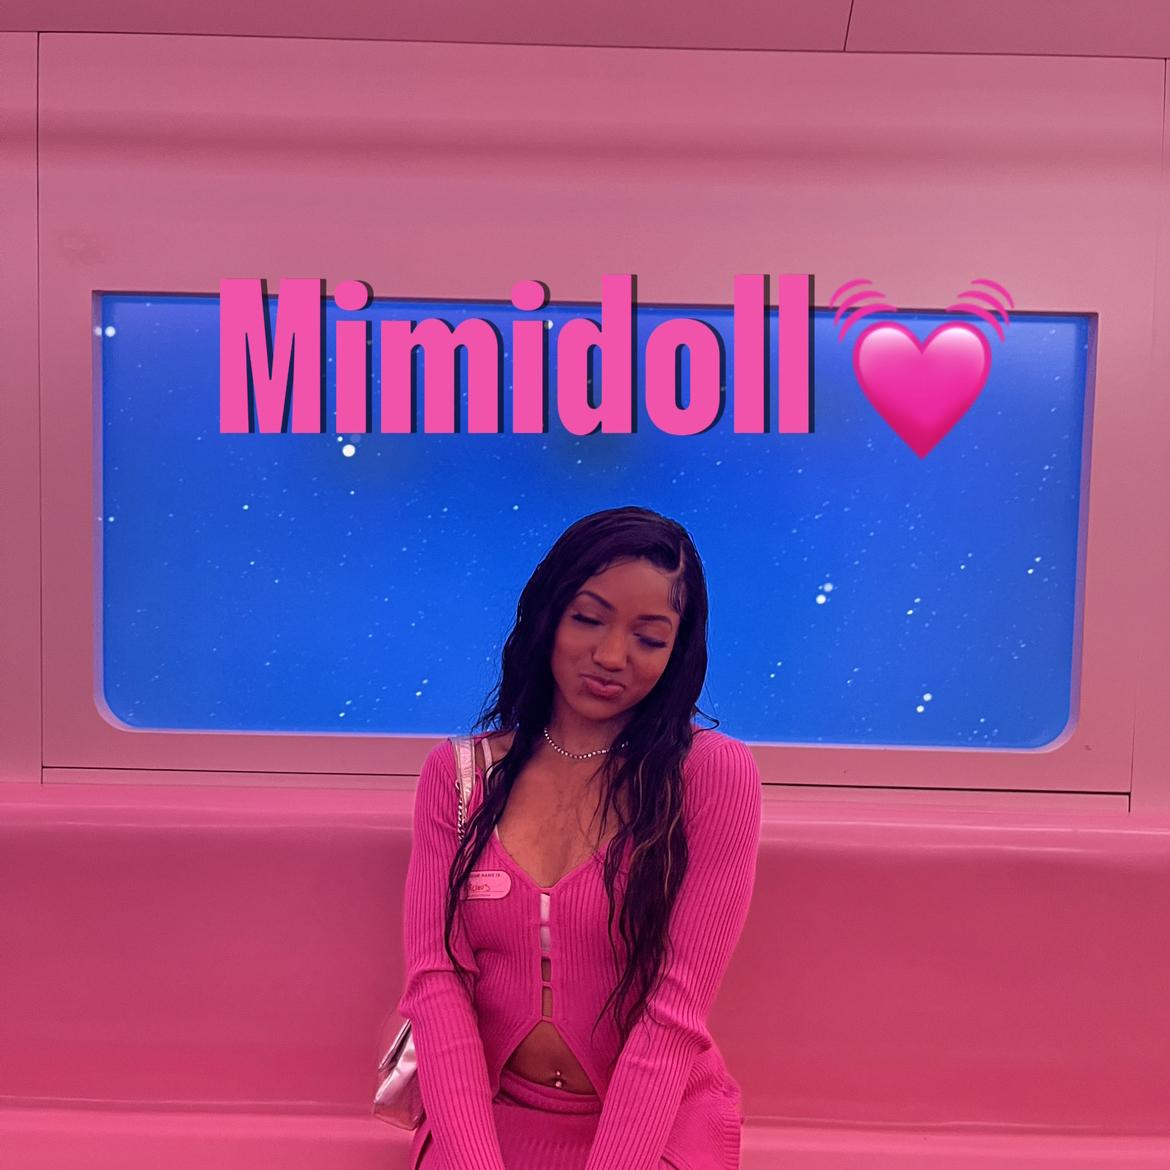 MimiDoll🎀's images